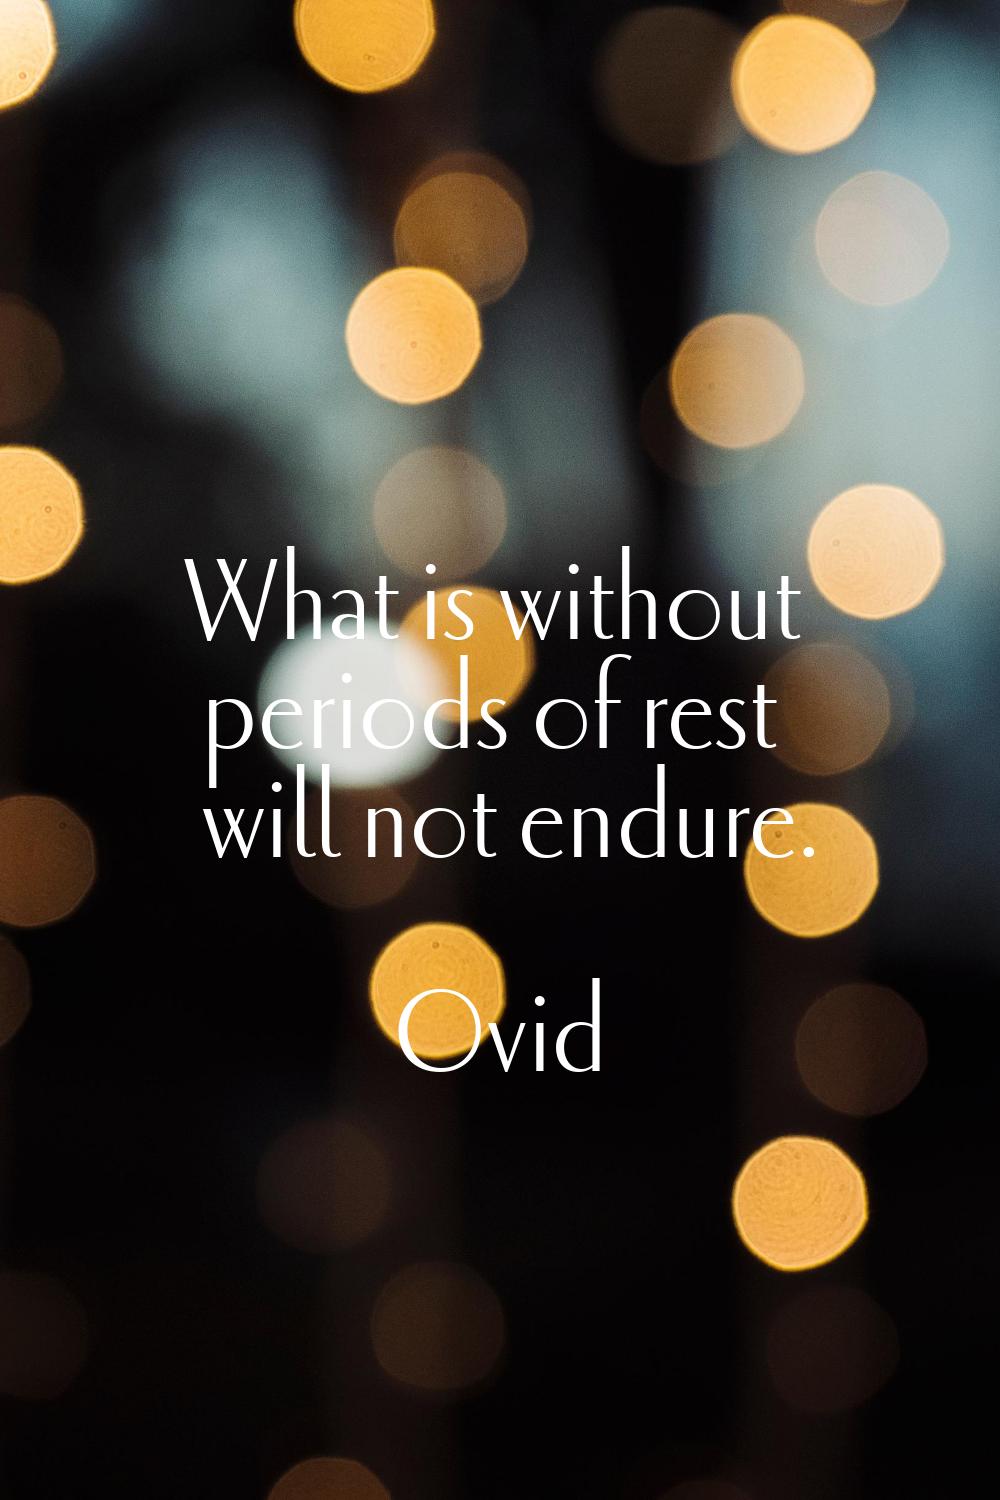 What is without periods of rest will not endure.